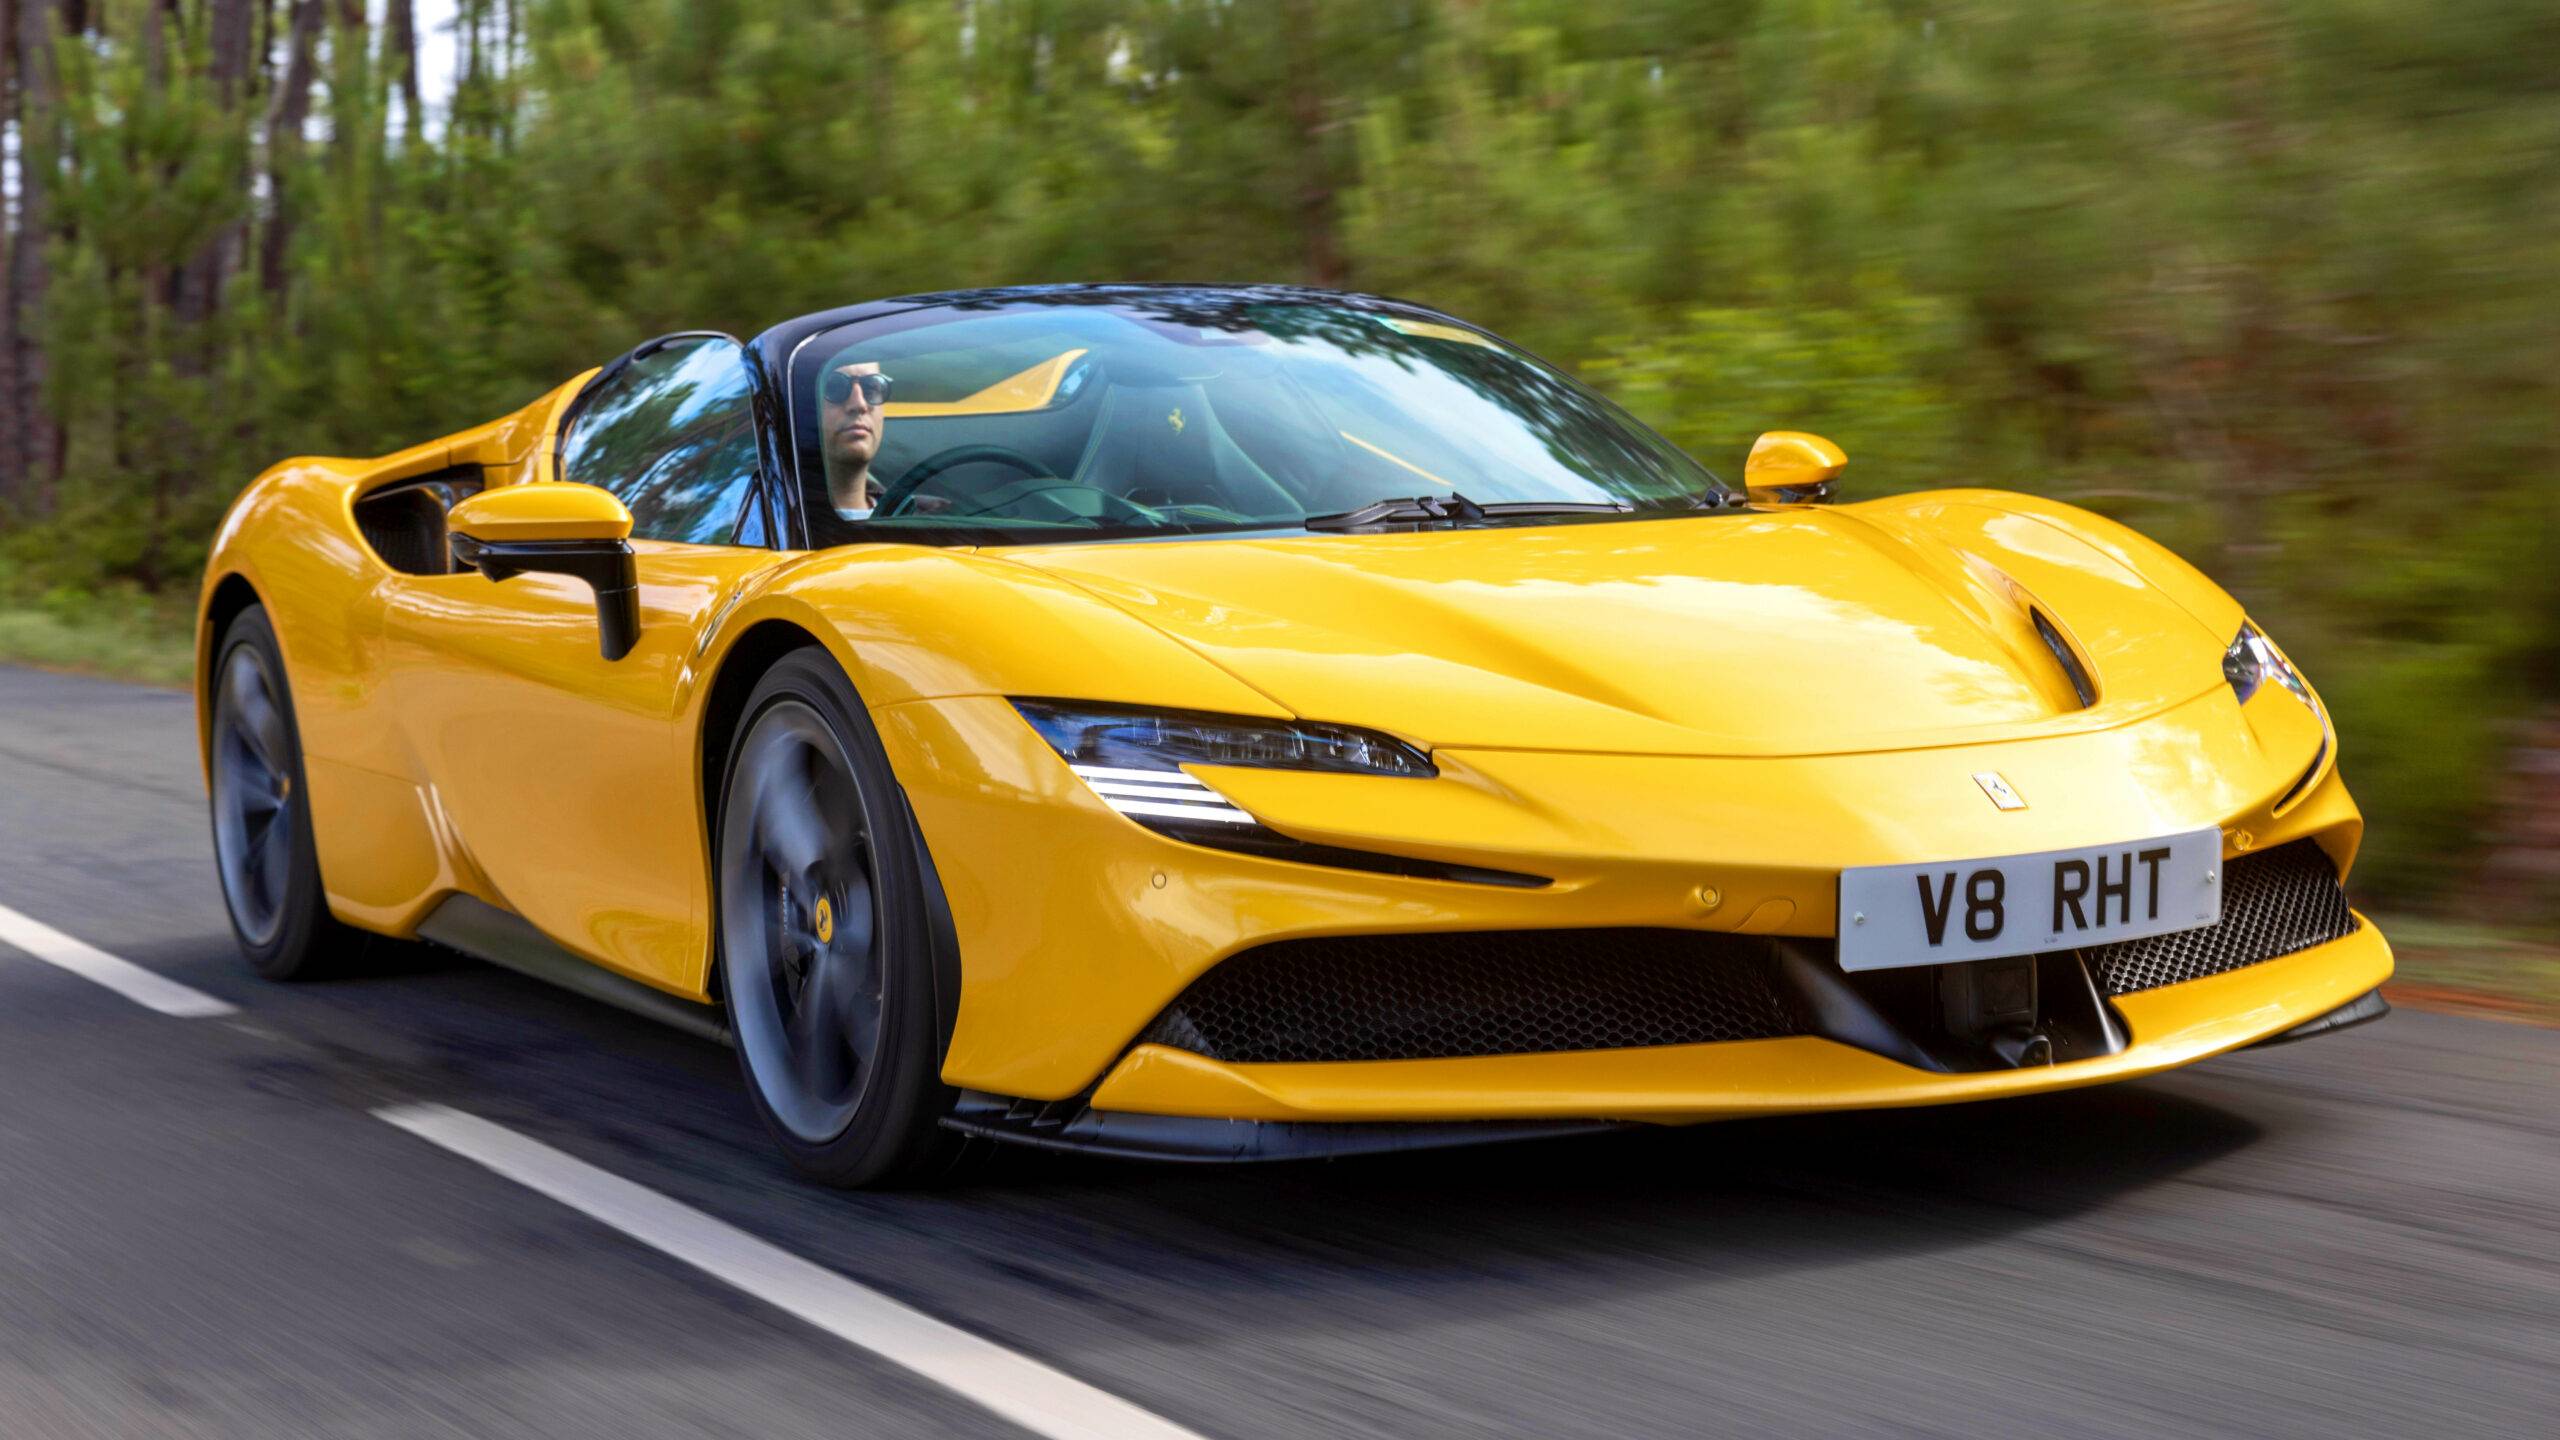 The Ferrari SF 90 Spider in yellow on a road.